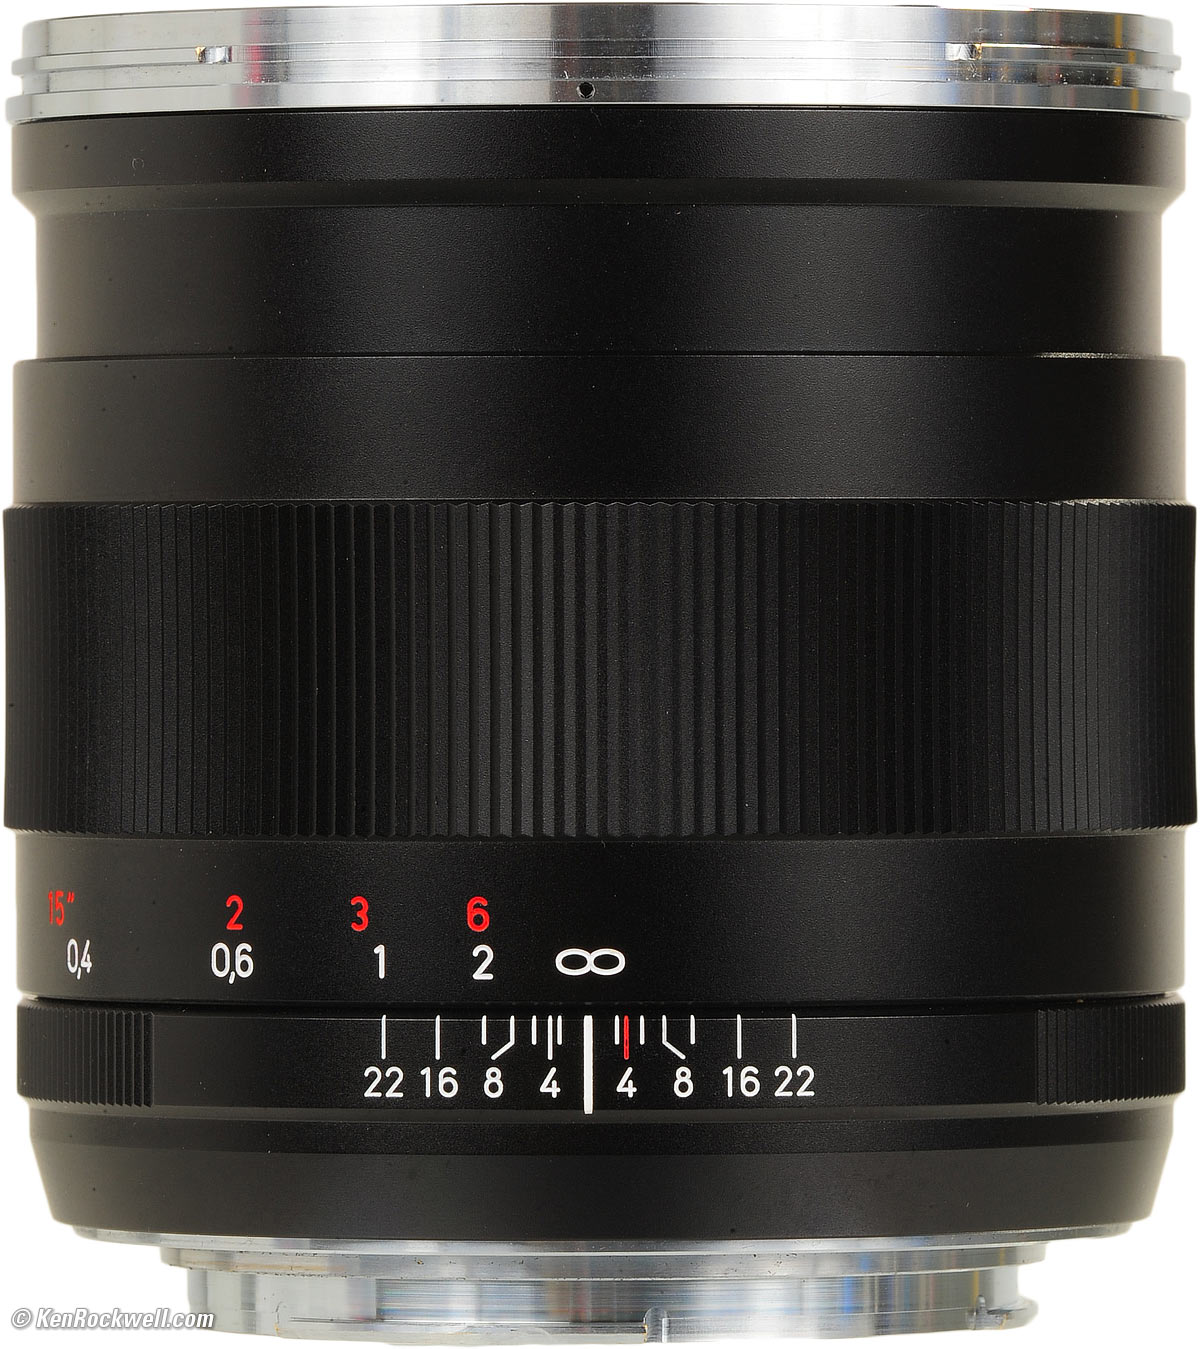 Zeiss 25mm f/2 Distagon Review